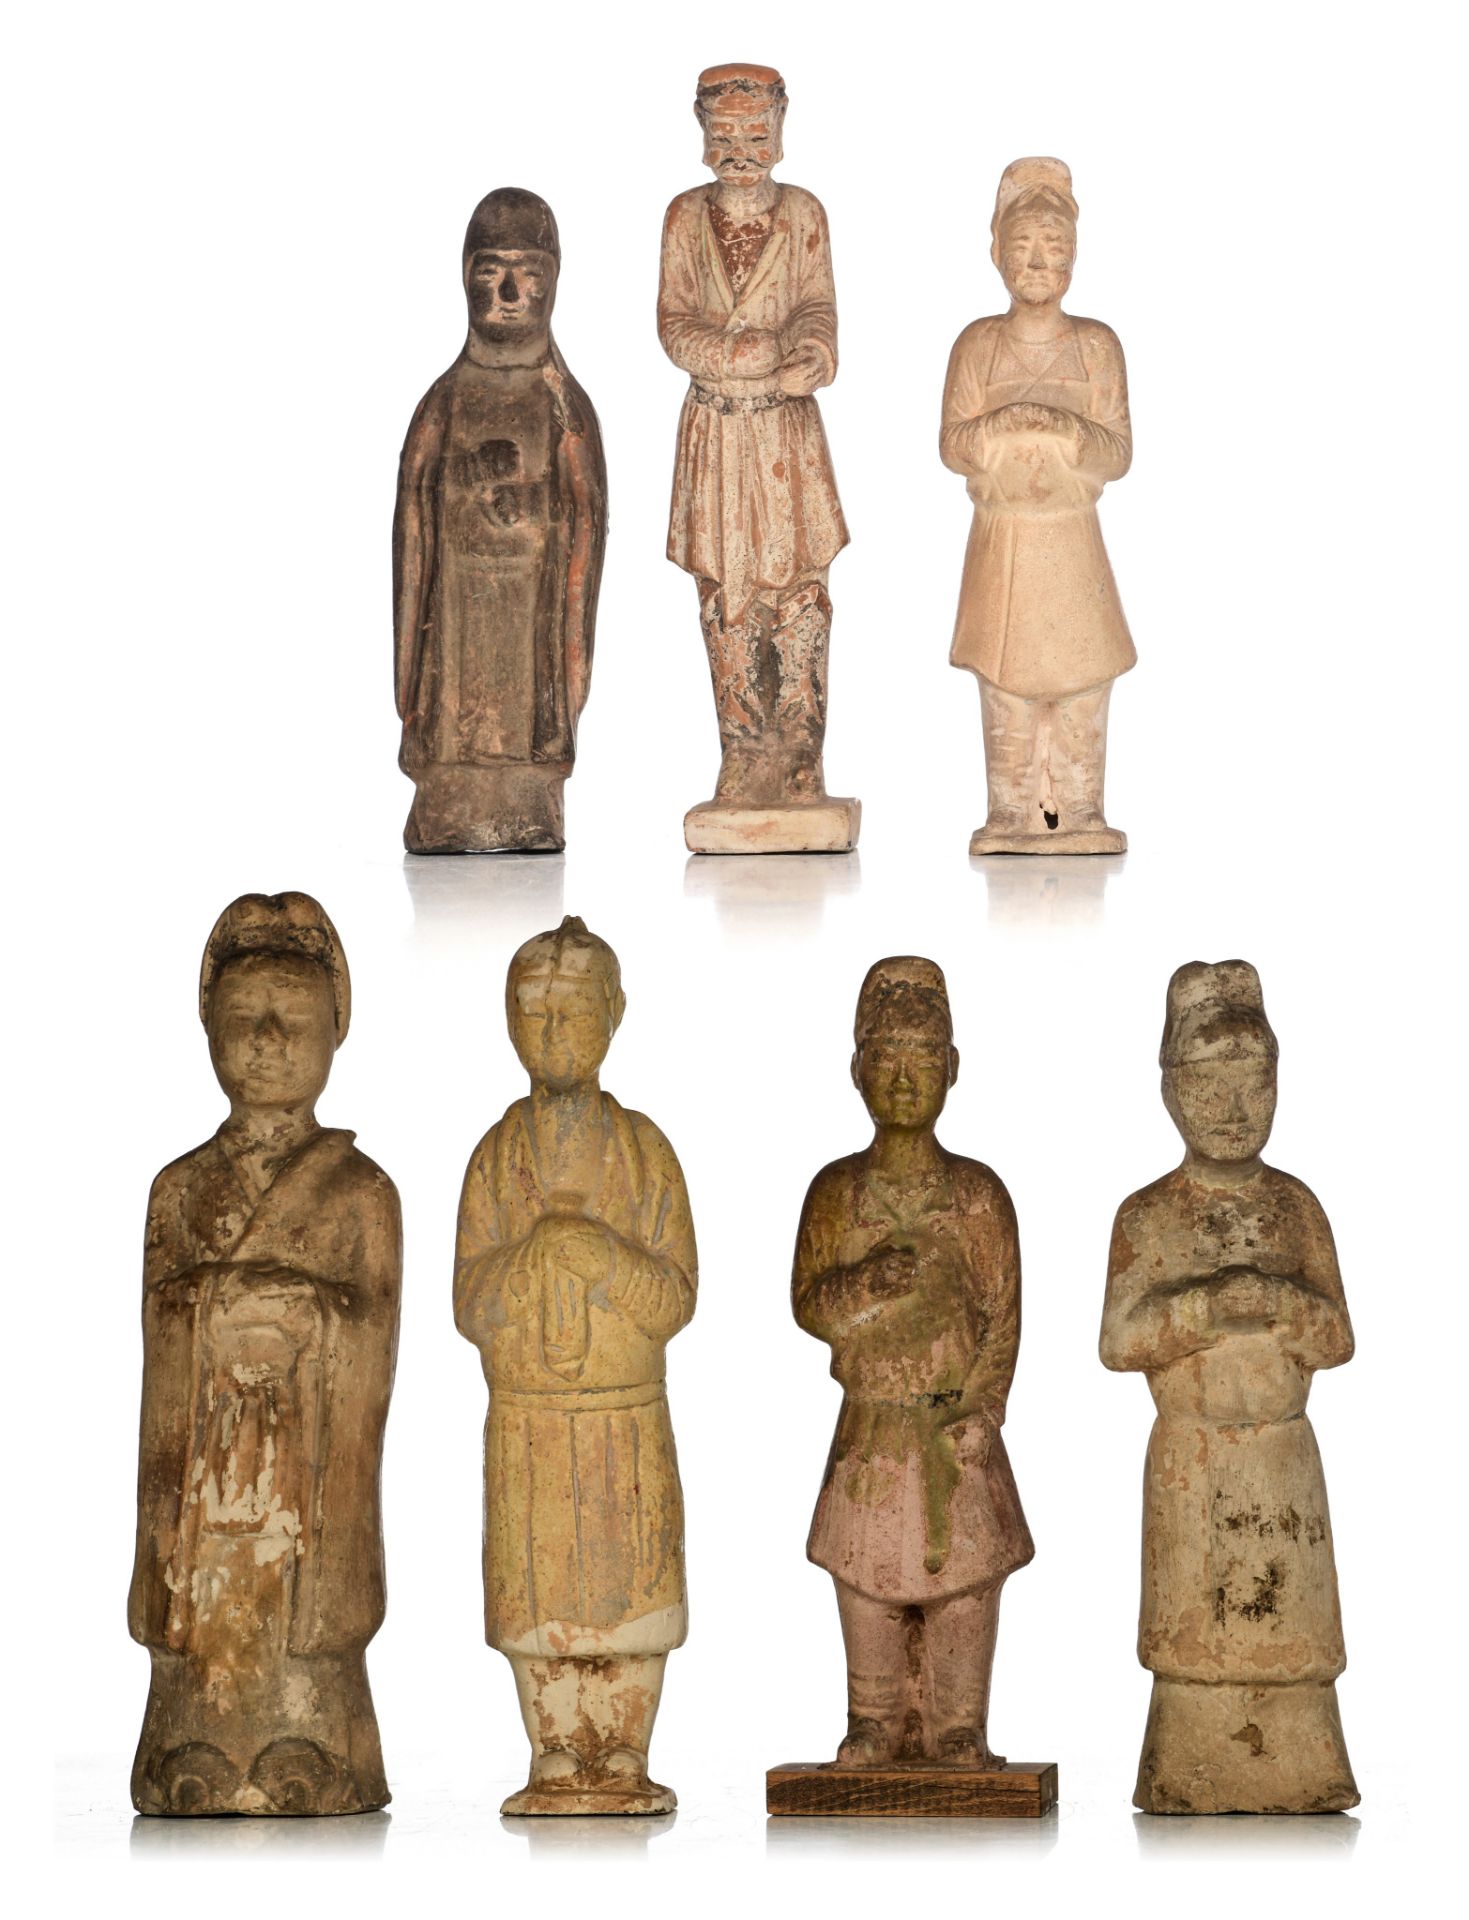 A collection of Chinese (straw-glazed) pottery ware, Northern Wei - Tang dynasty, tallest H 29,5 cm